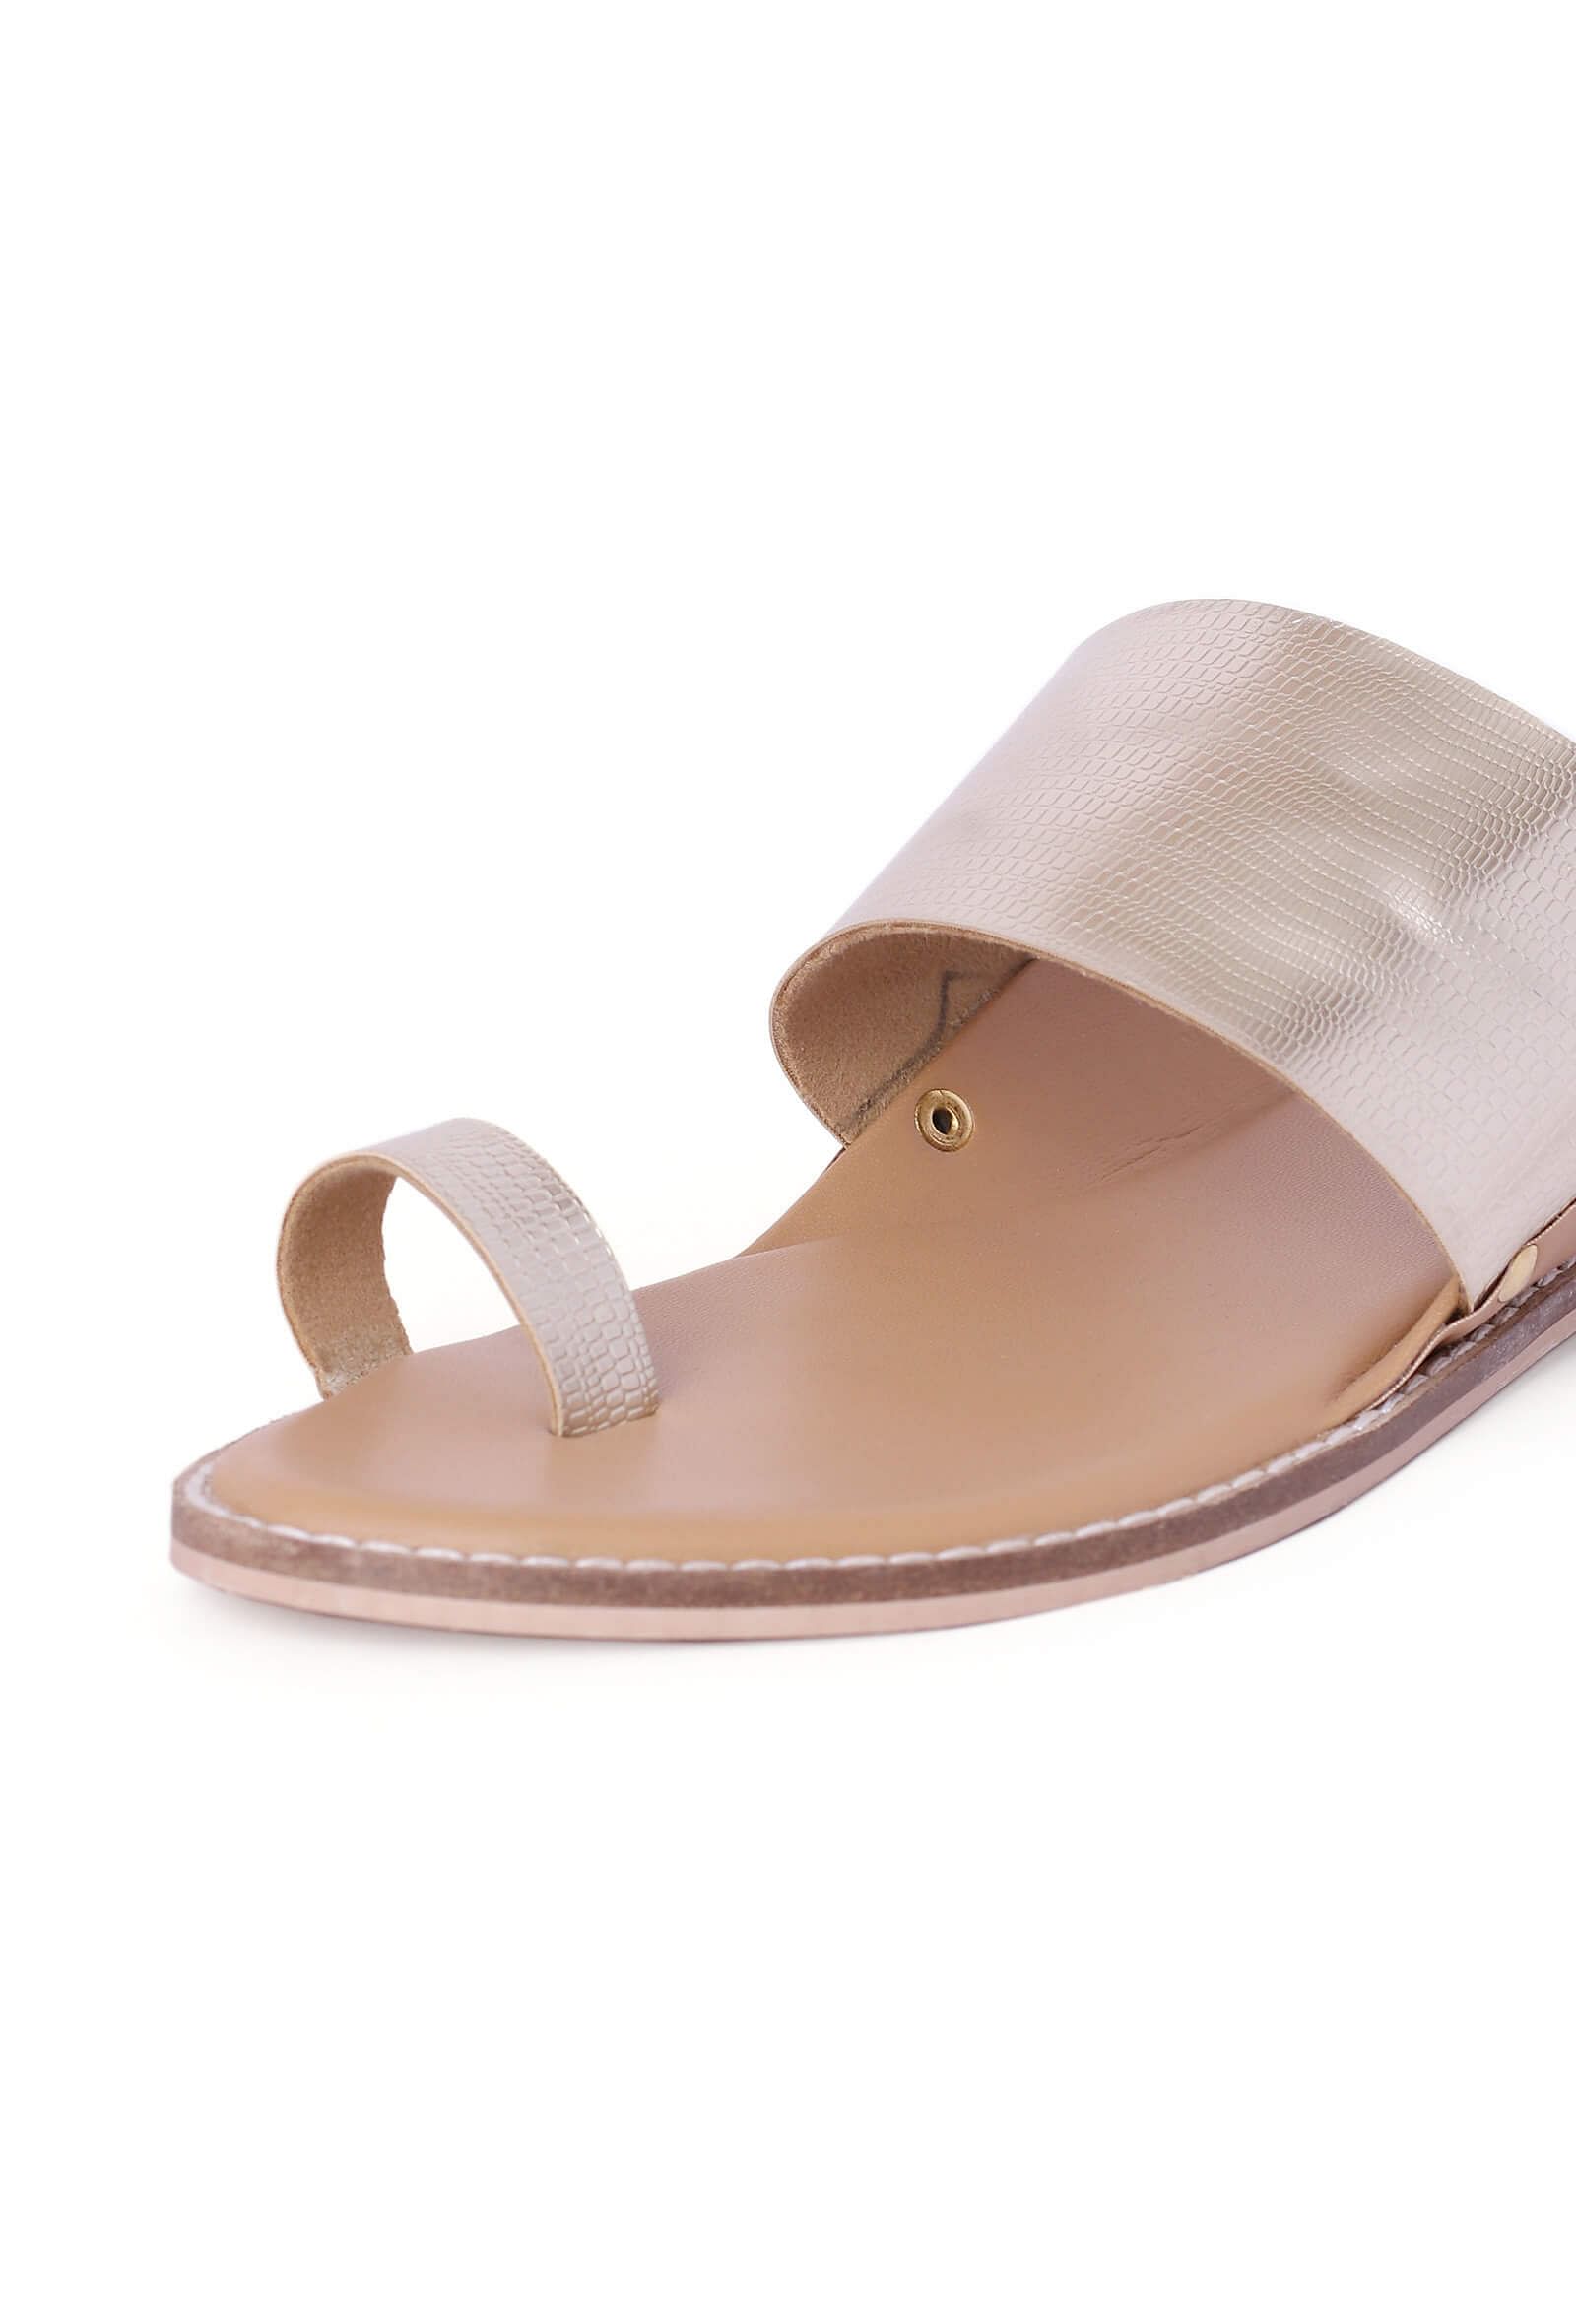 Textured Silver Cruelty-Free Leather Kolhapuri Inspired  Chappals